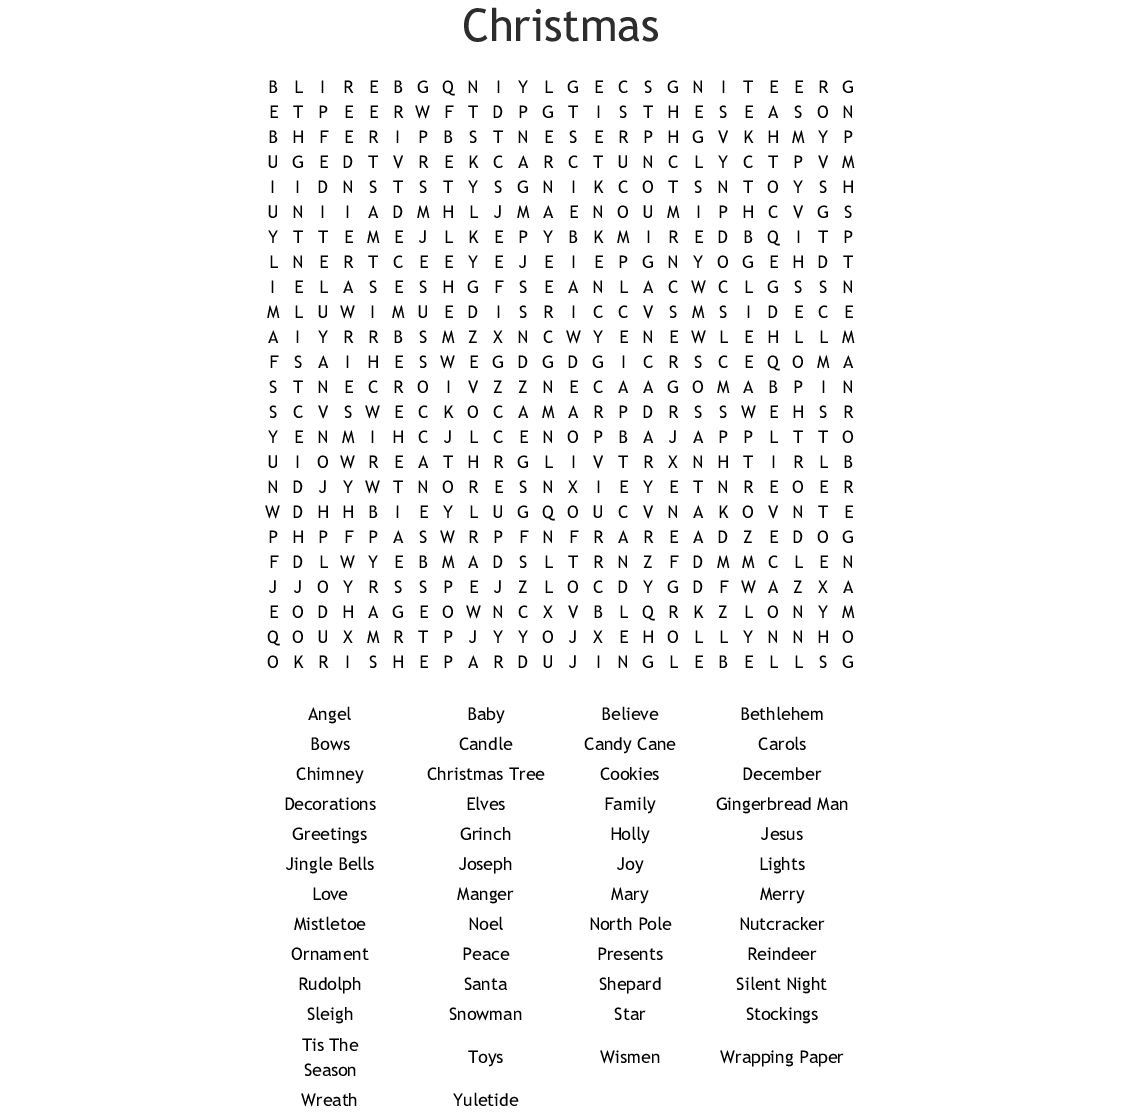 Christmas Word Search - Wordmint